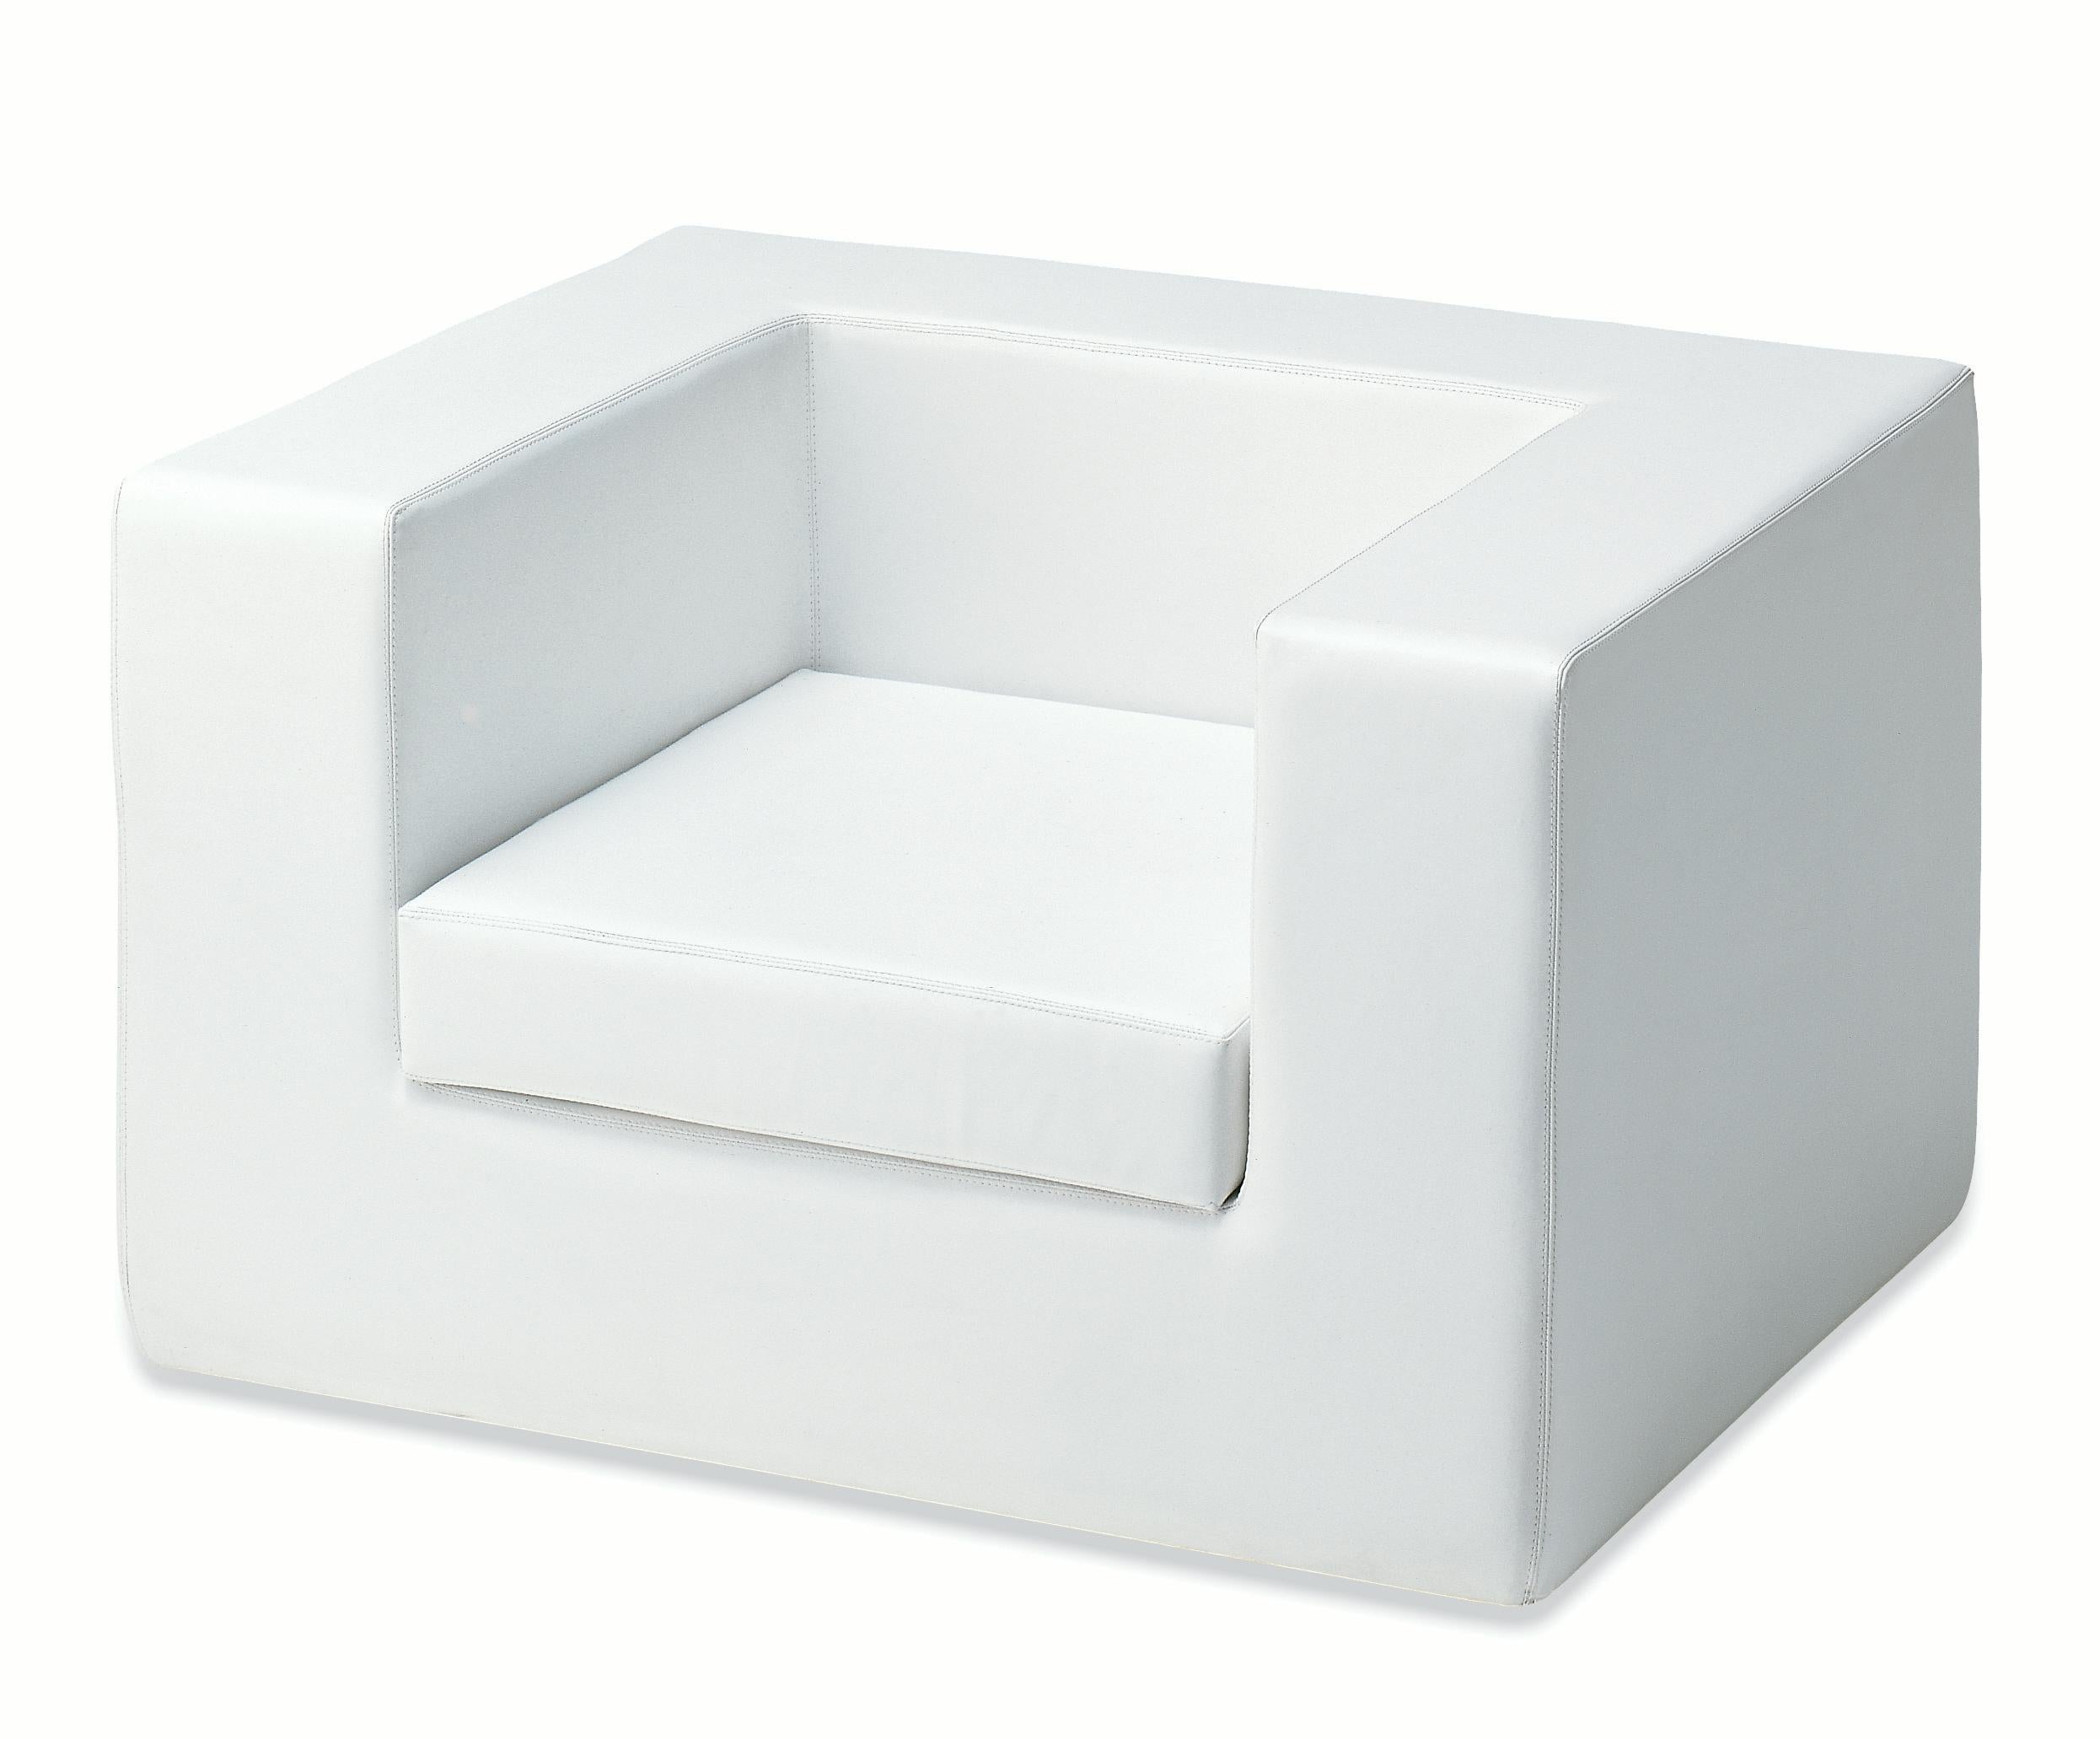 Zanotta Throw Away Armchair in White Leather by Willie Landels

Expanded polyurethane frameless body. The version with the removable cover provides an internal, fixed nylon cover and an external one in fabric or leather.

Additional